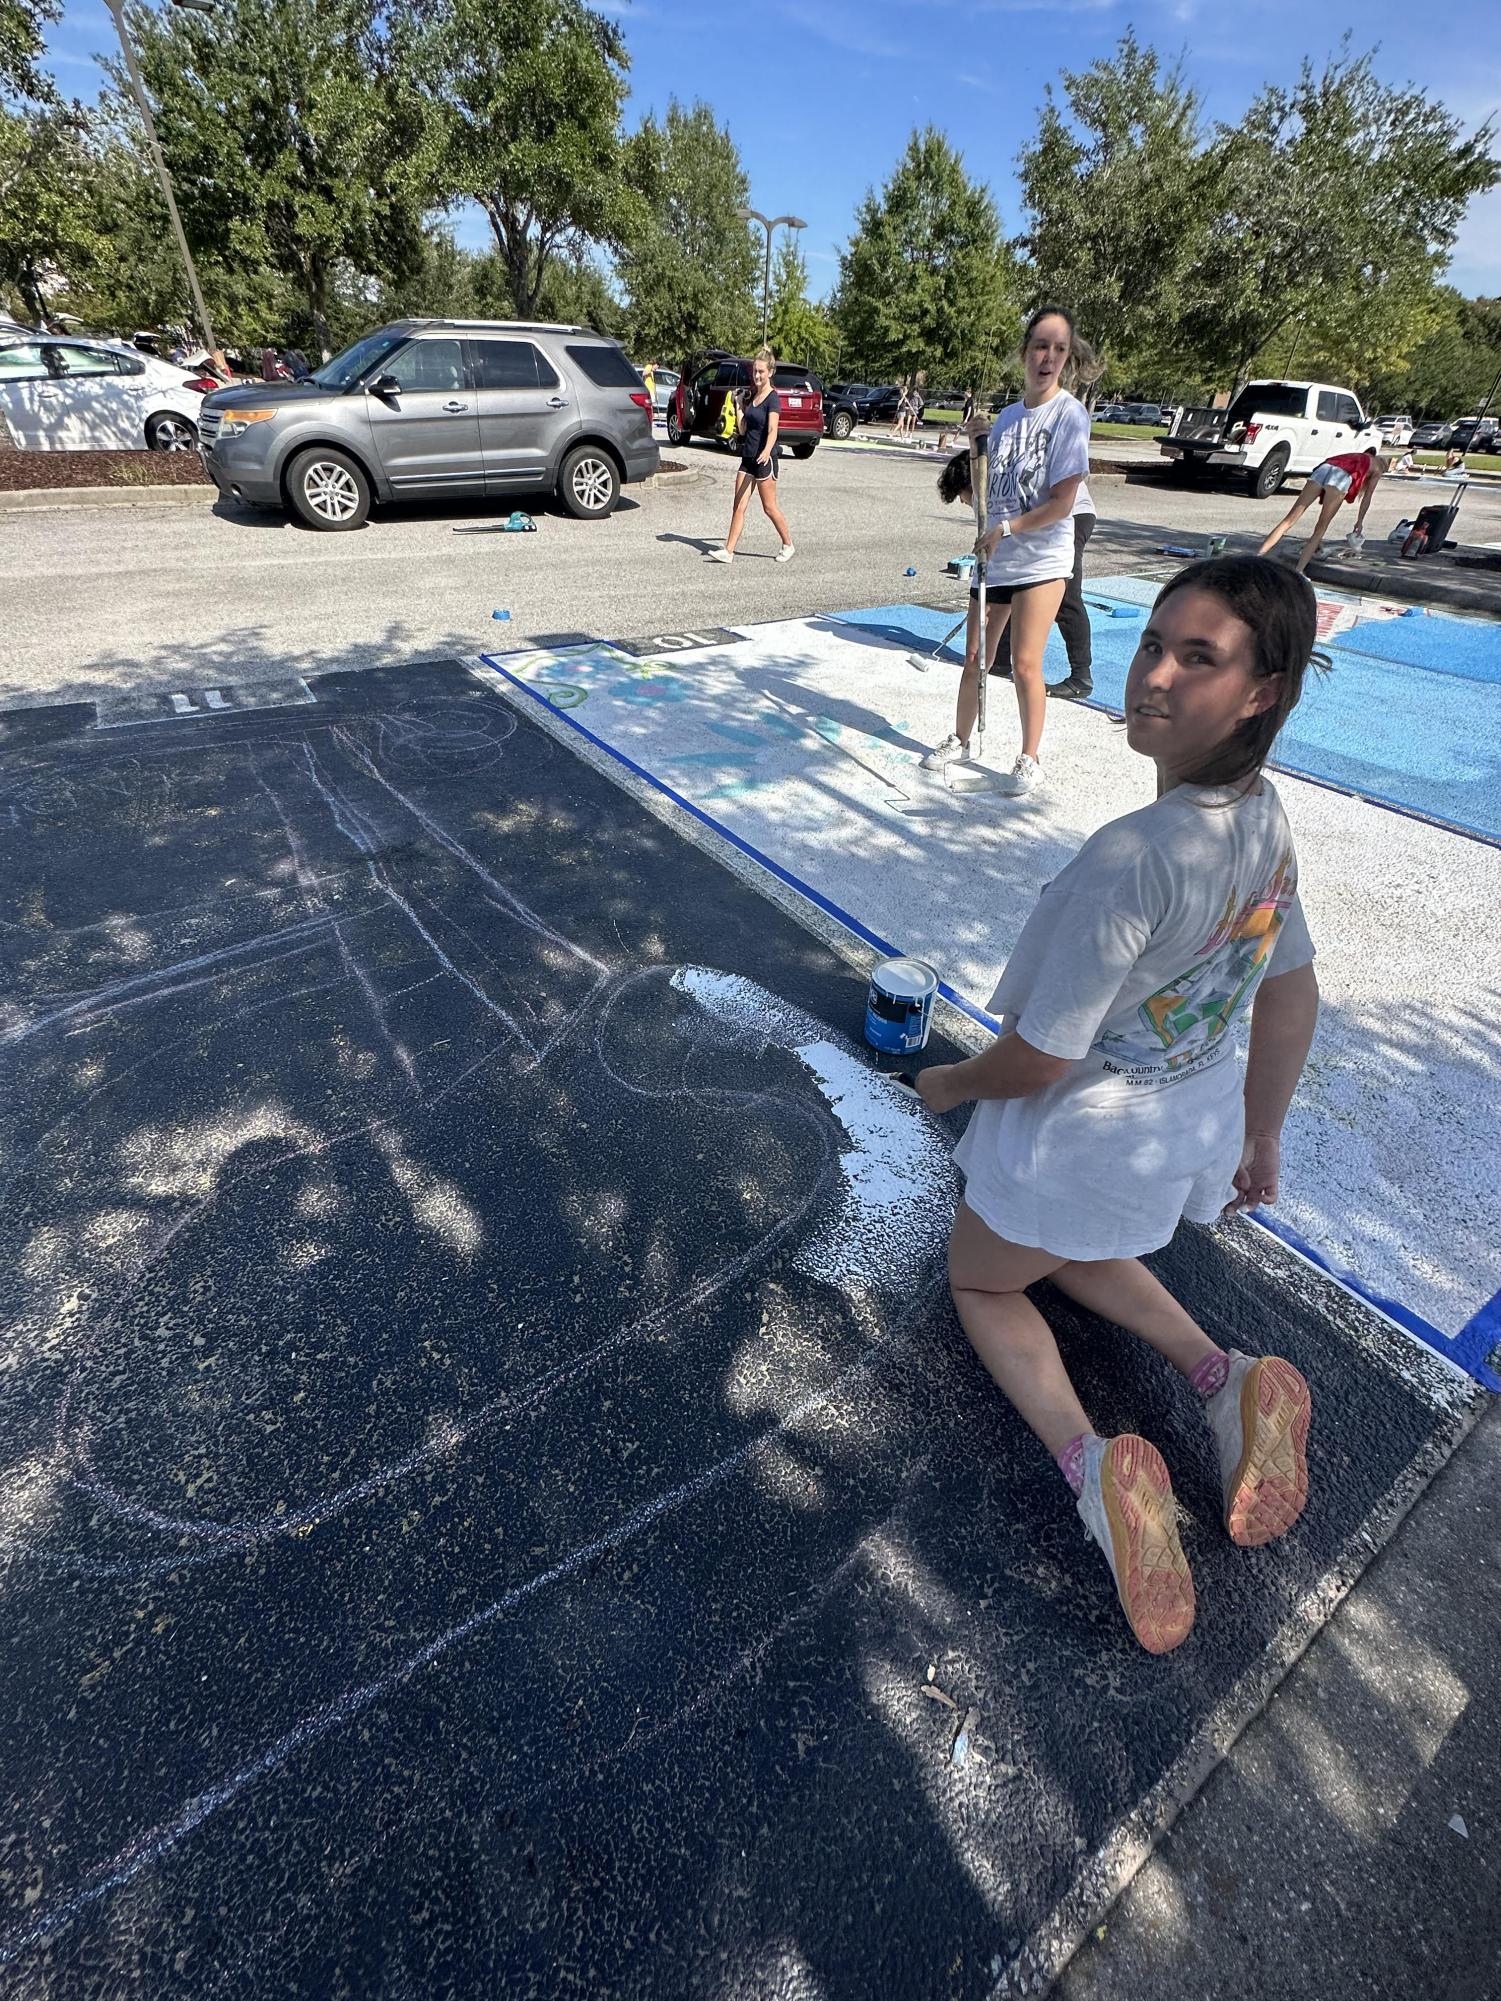 2023 Parking Spot Painting: A Tragedy